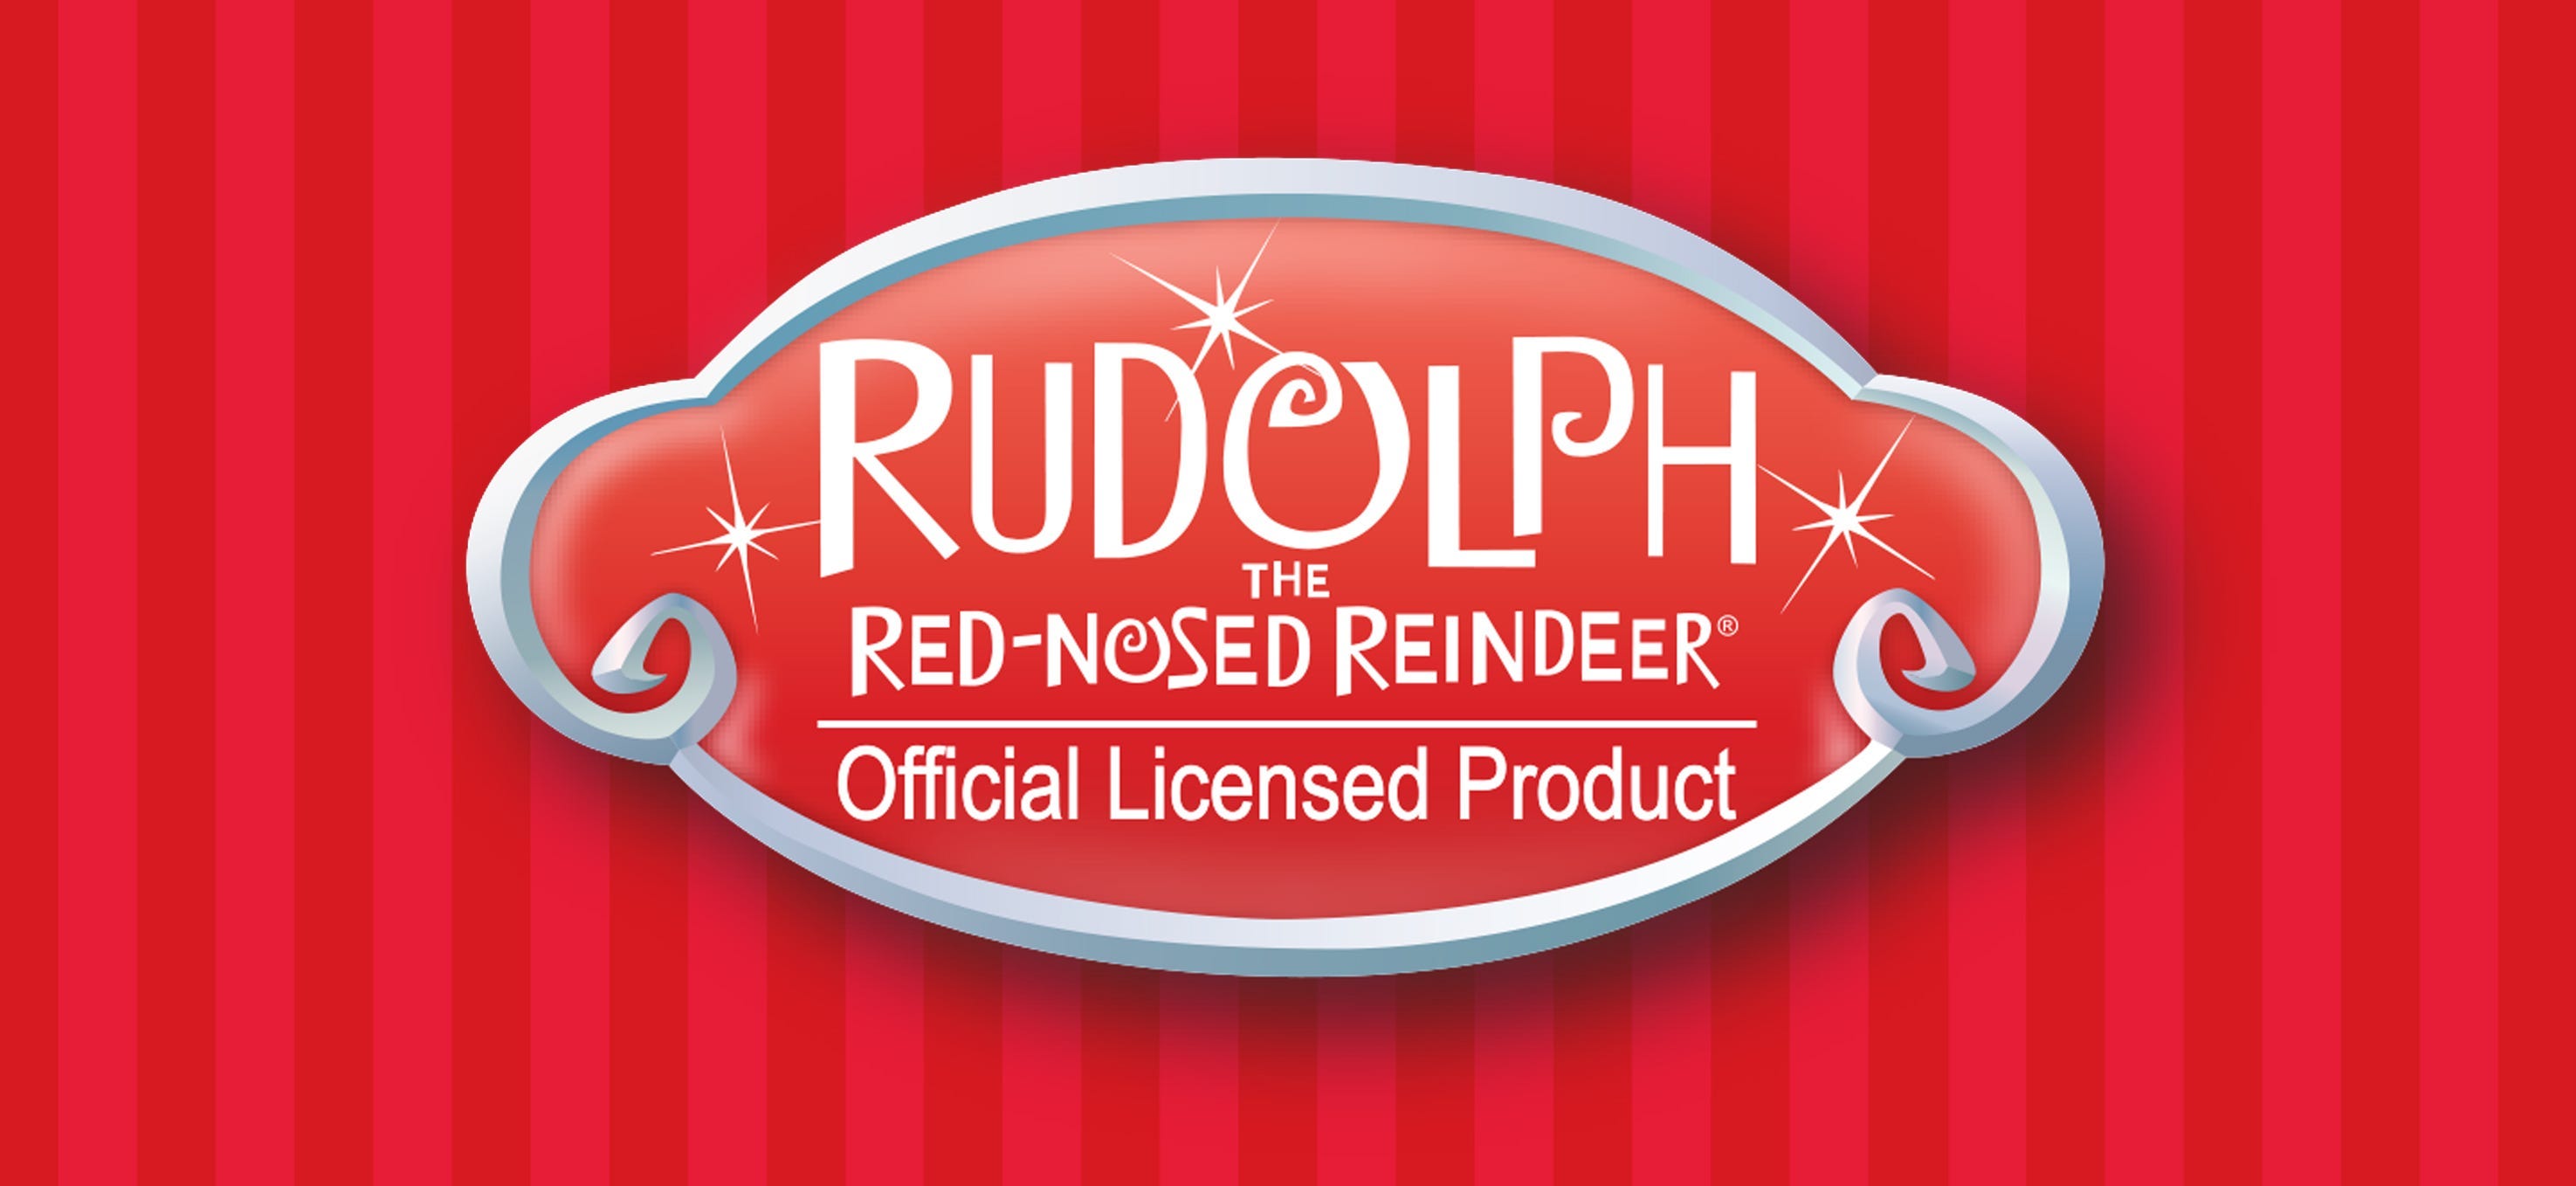 Rudolph The Red Nose Reindeer®